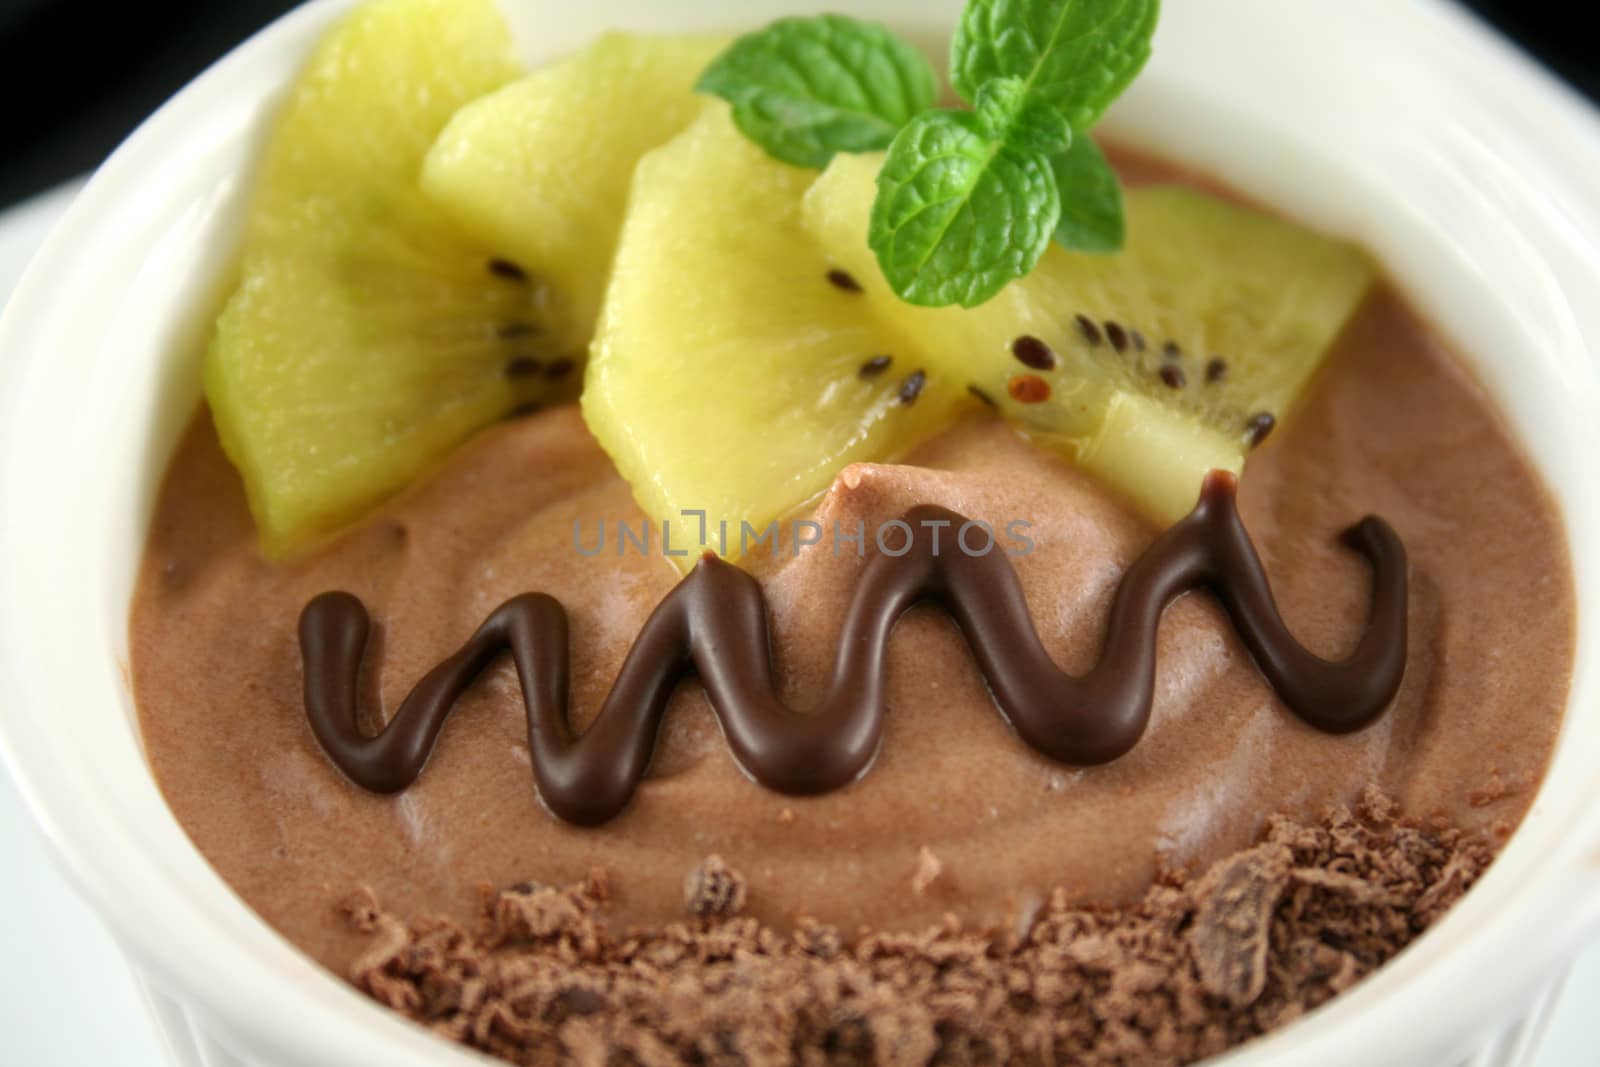 Chocolate mousse with yellow kiwi fruit and mint.